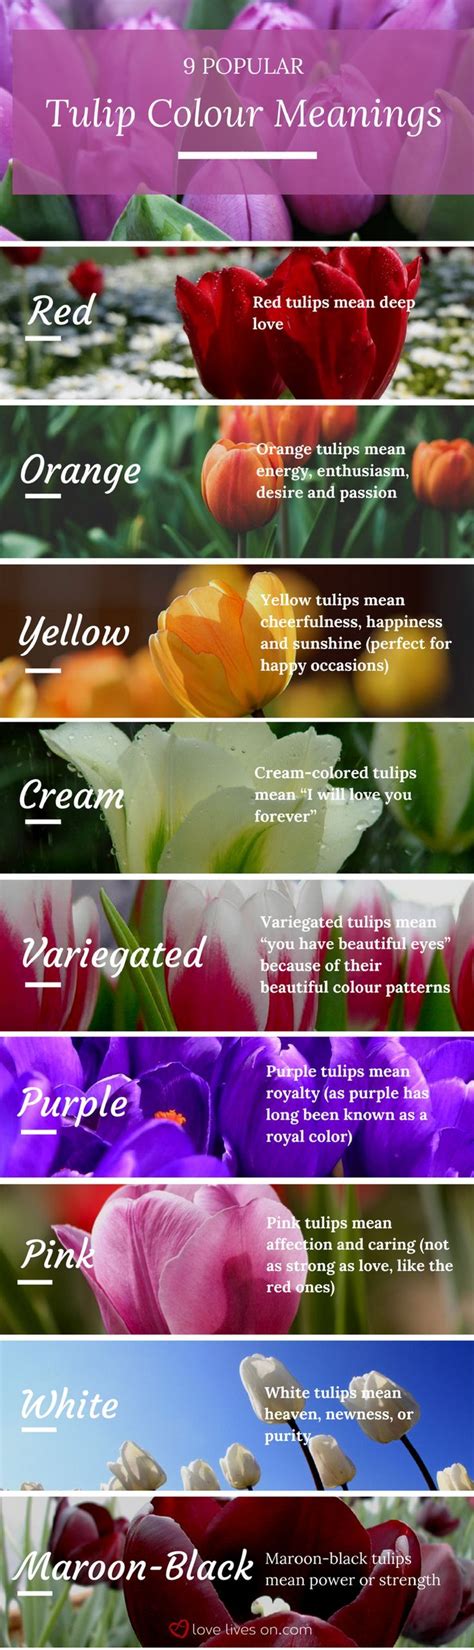 Funeral Flowers and Their Meanings | The Ultimate Guide | Tulip colors, Tulips meaning, Flower ...